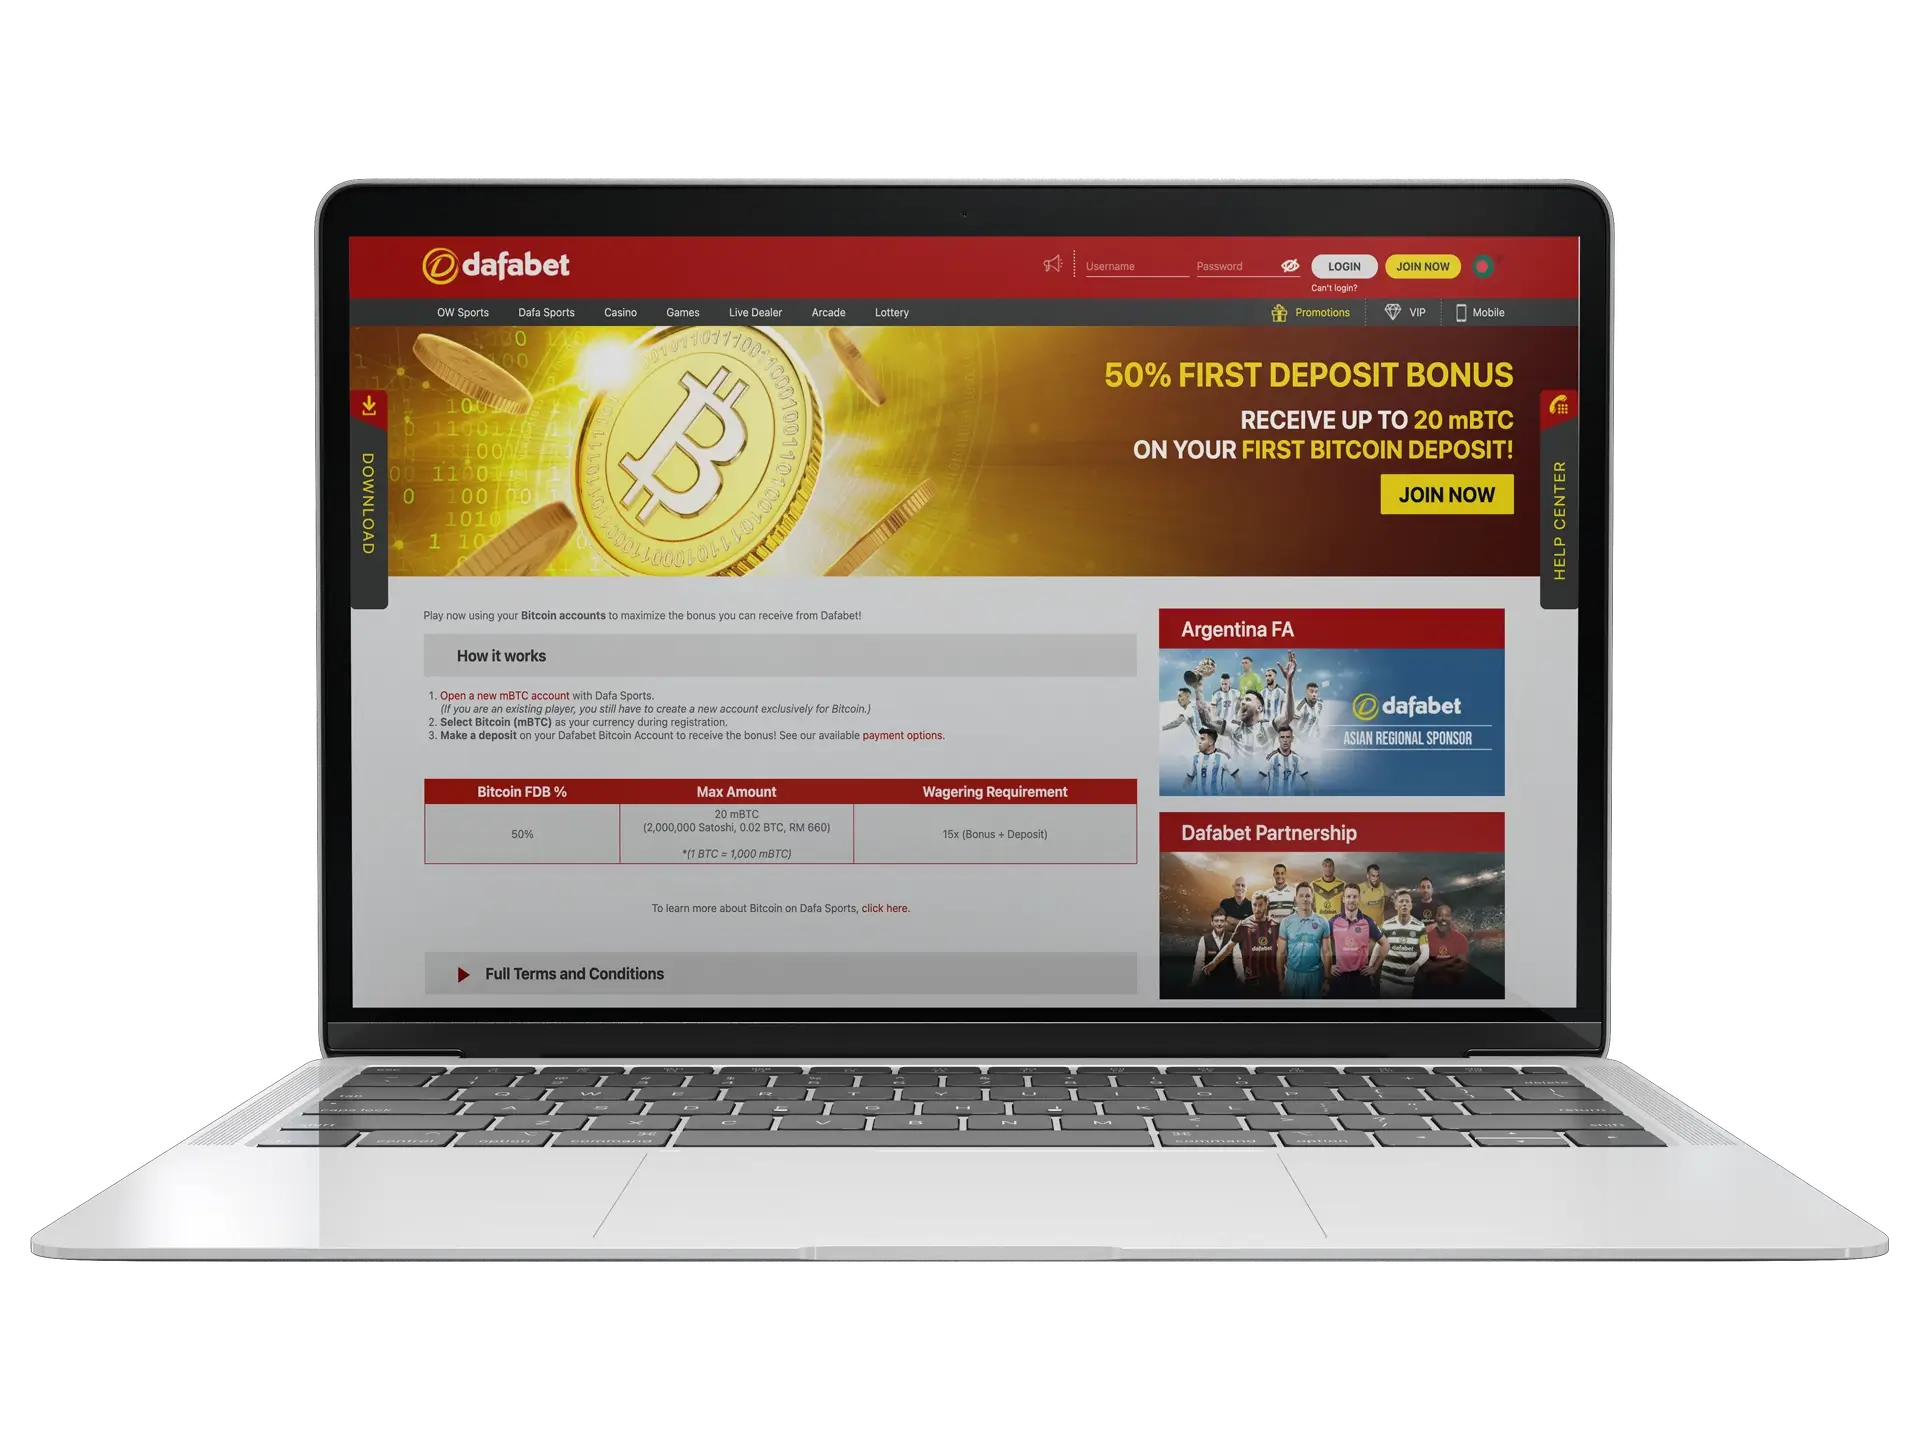 Claim your bonus after depositing cryptocurrency into your Dafabet account.